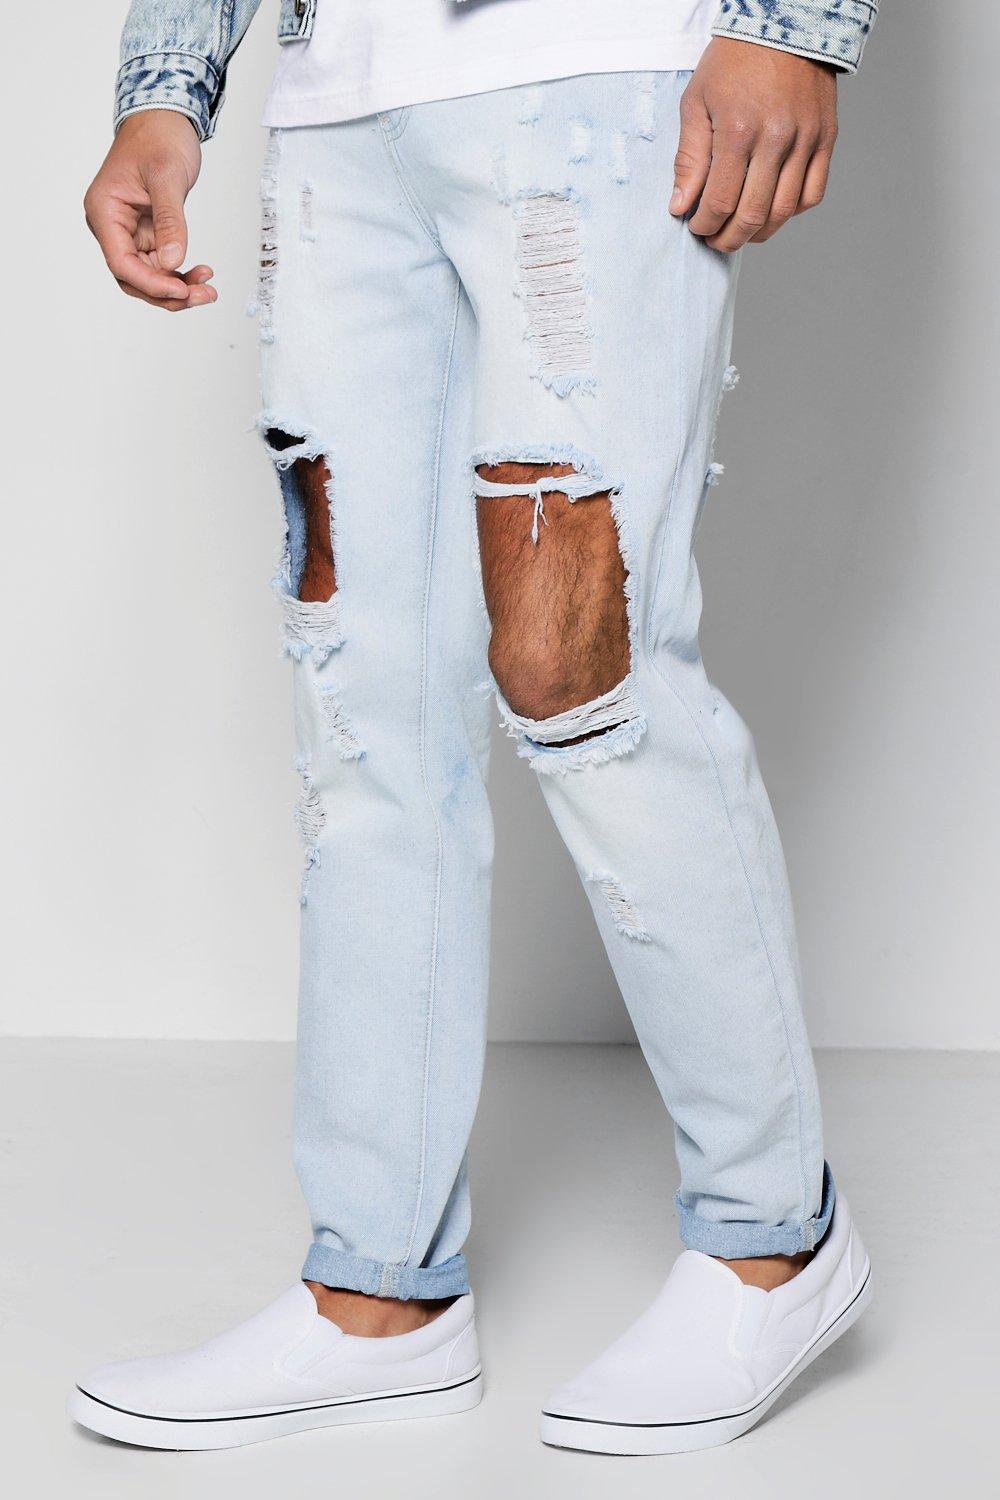 pale blue cropped jeans